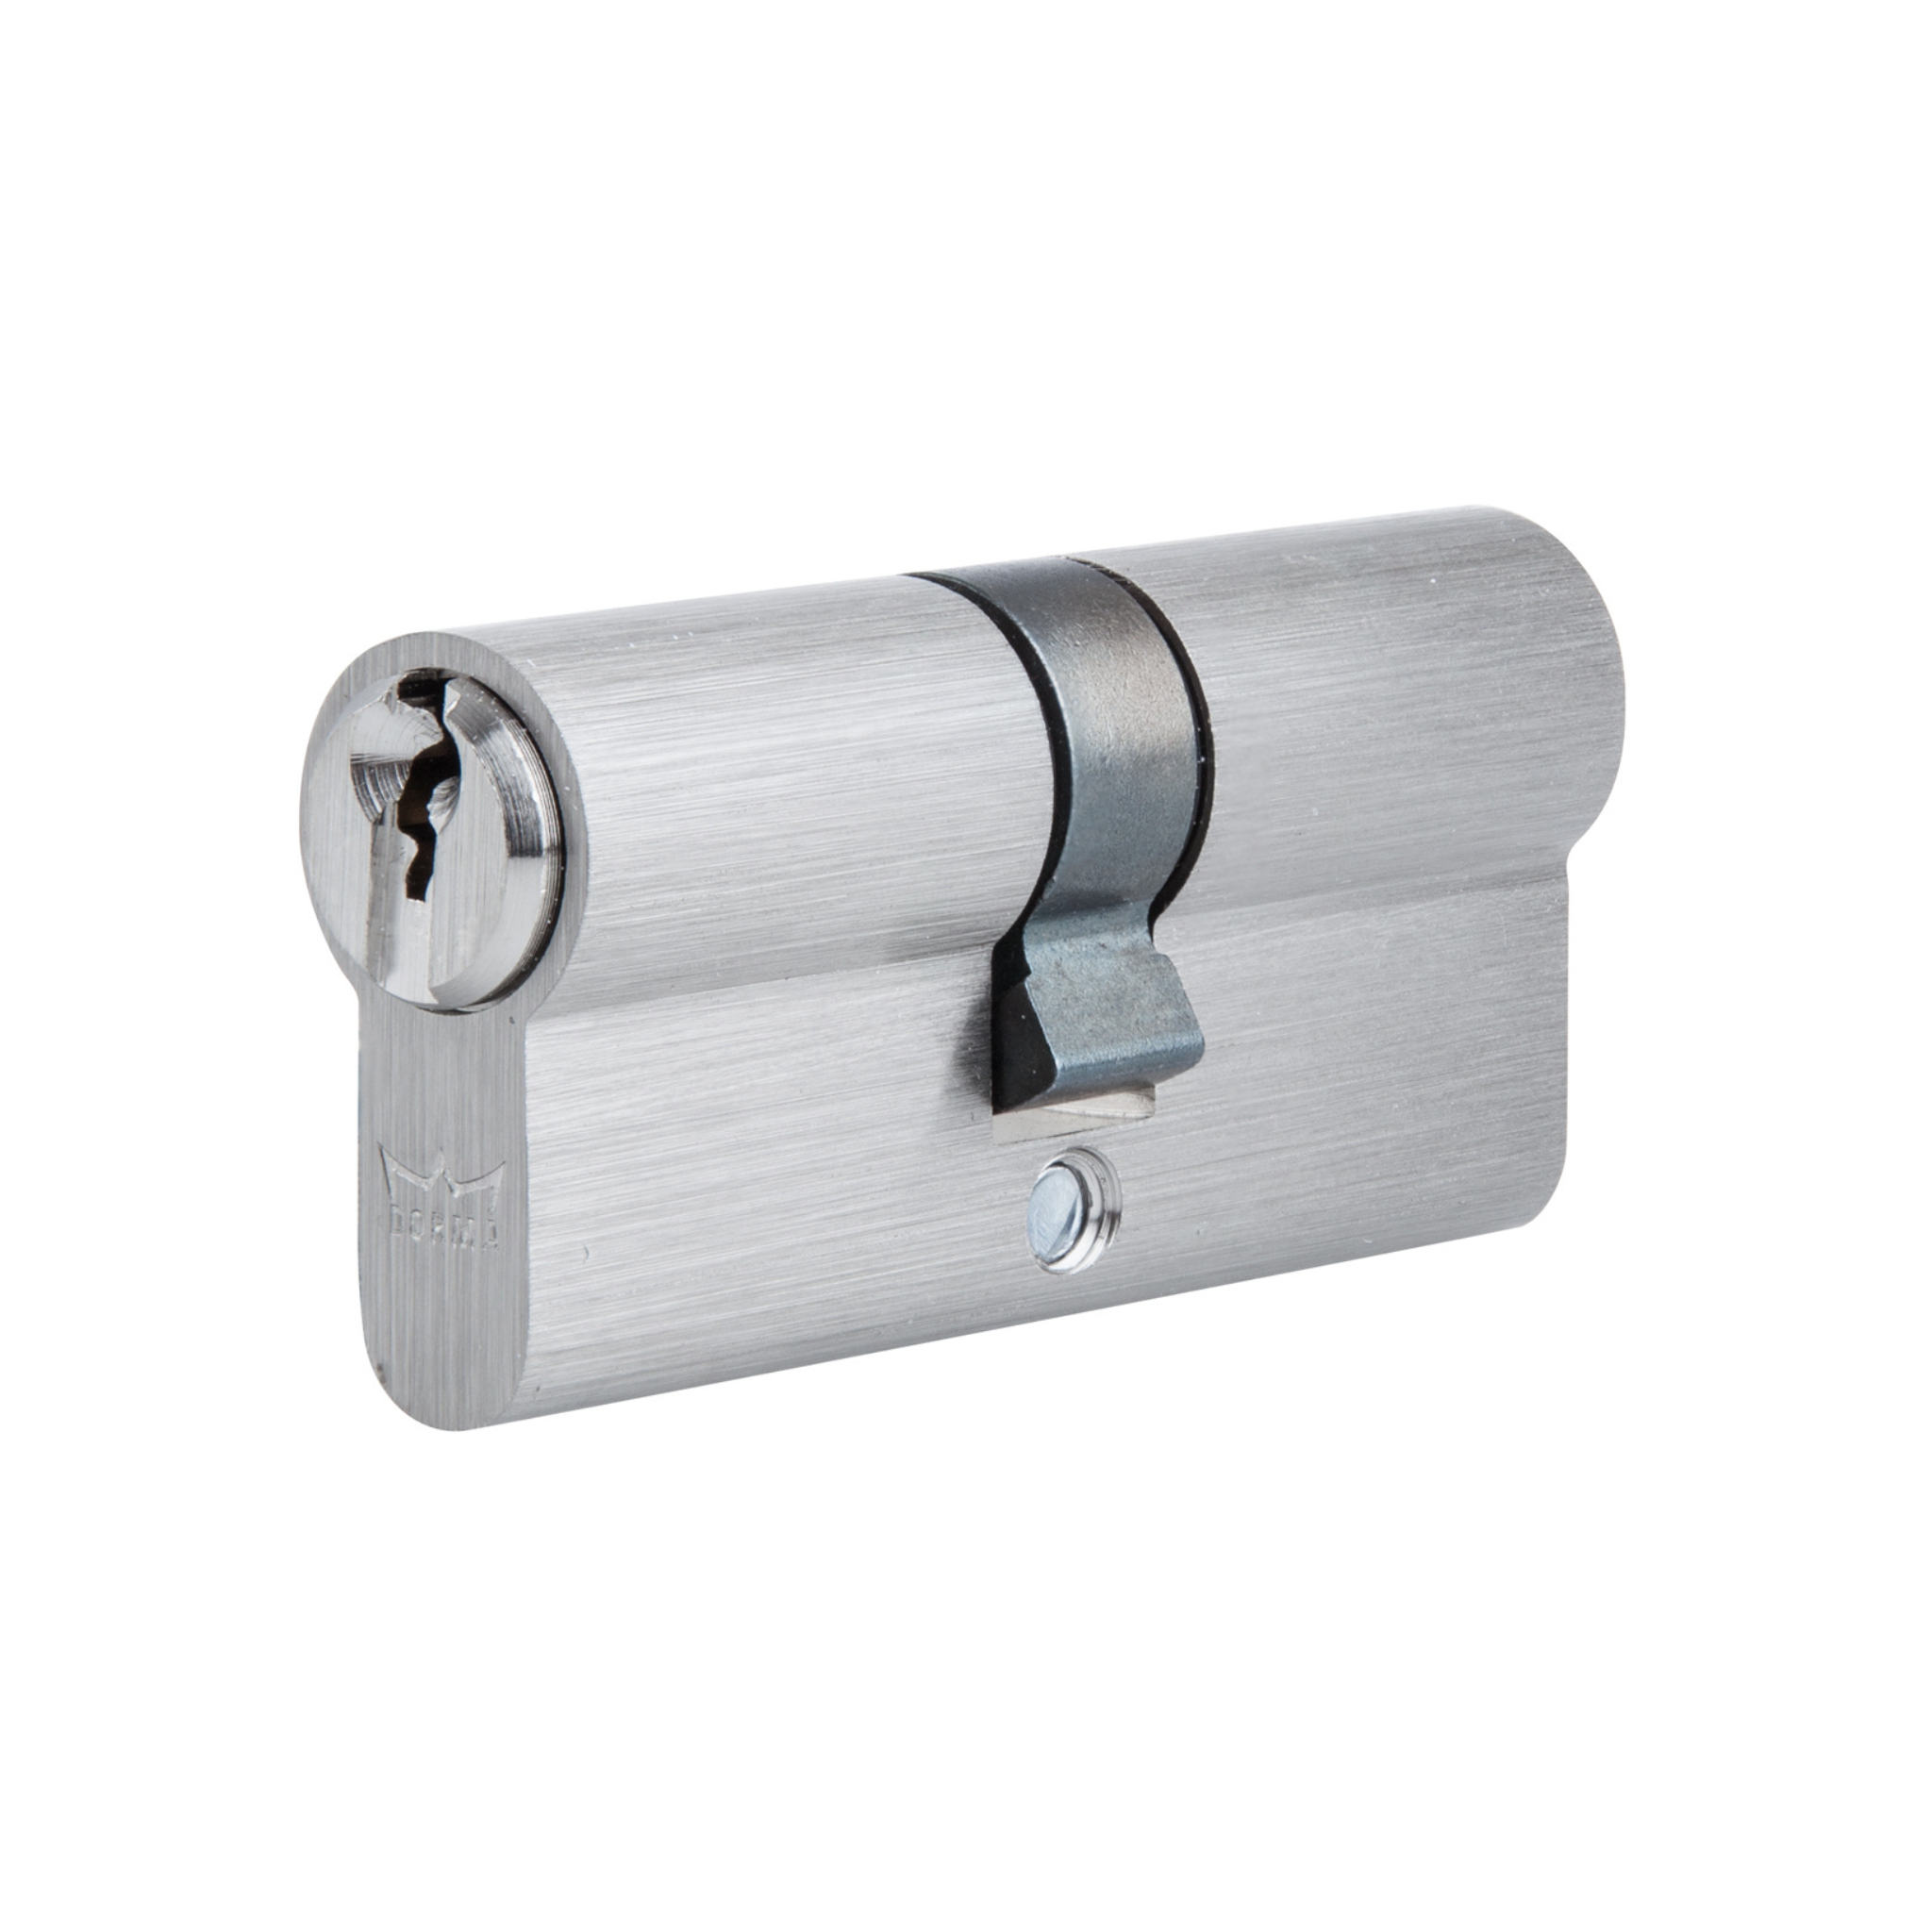 DDC056001 KD, 60mm (l), Double, Cylinder, Key to Key, Keyed Different, 5 Pin, Satin Nickel, DORMAKABA